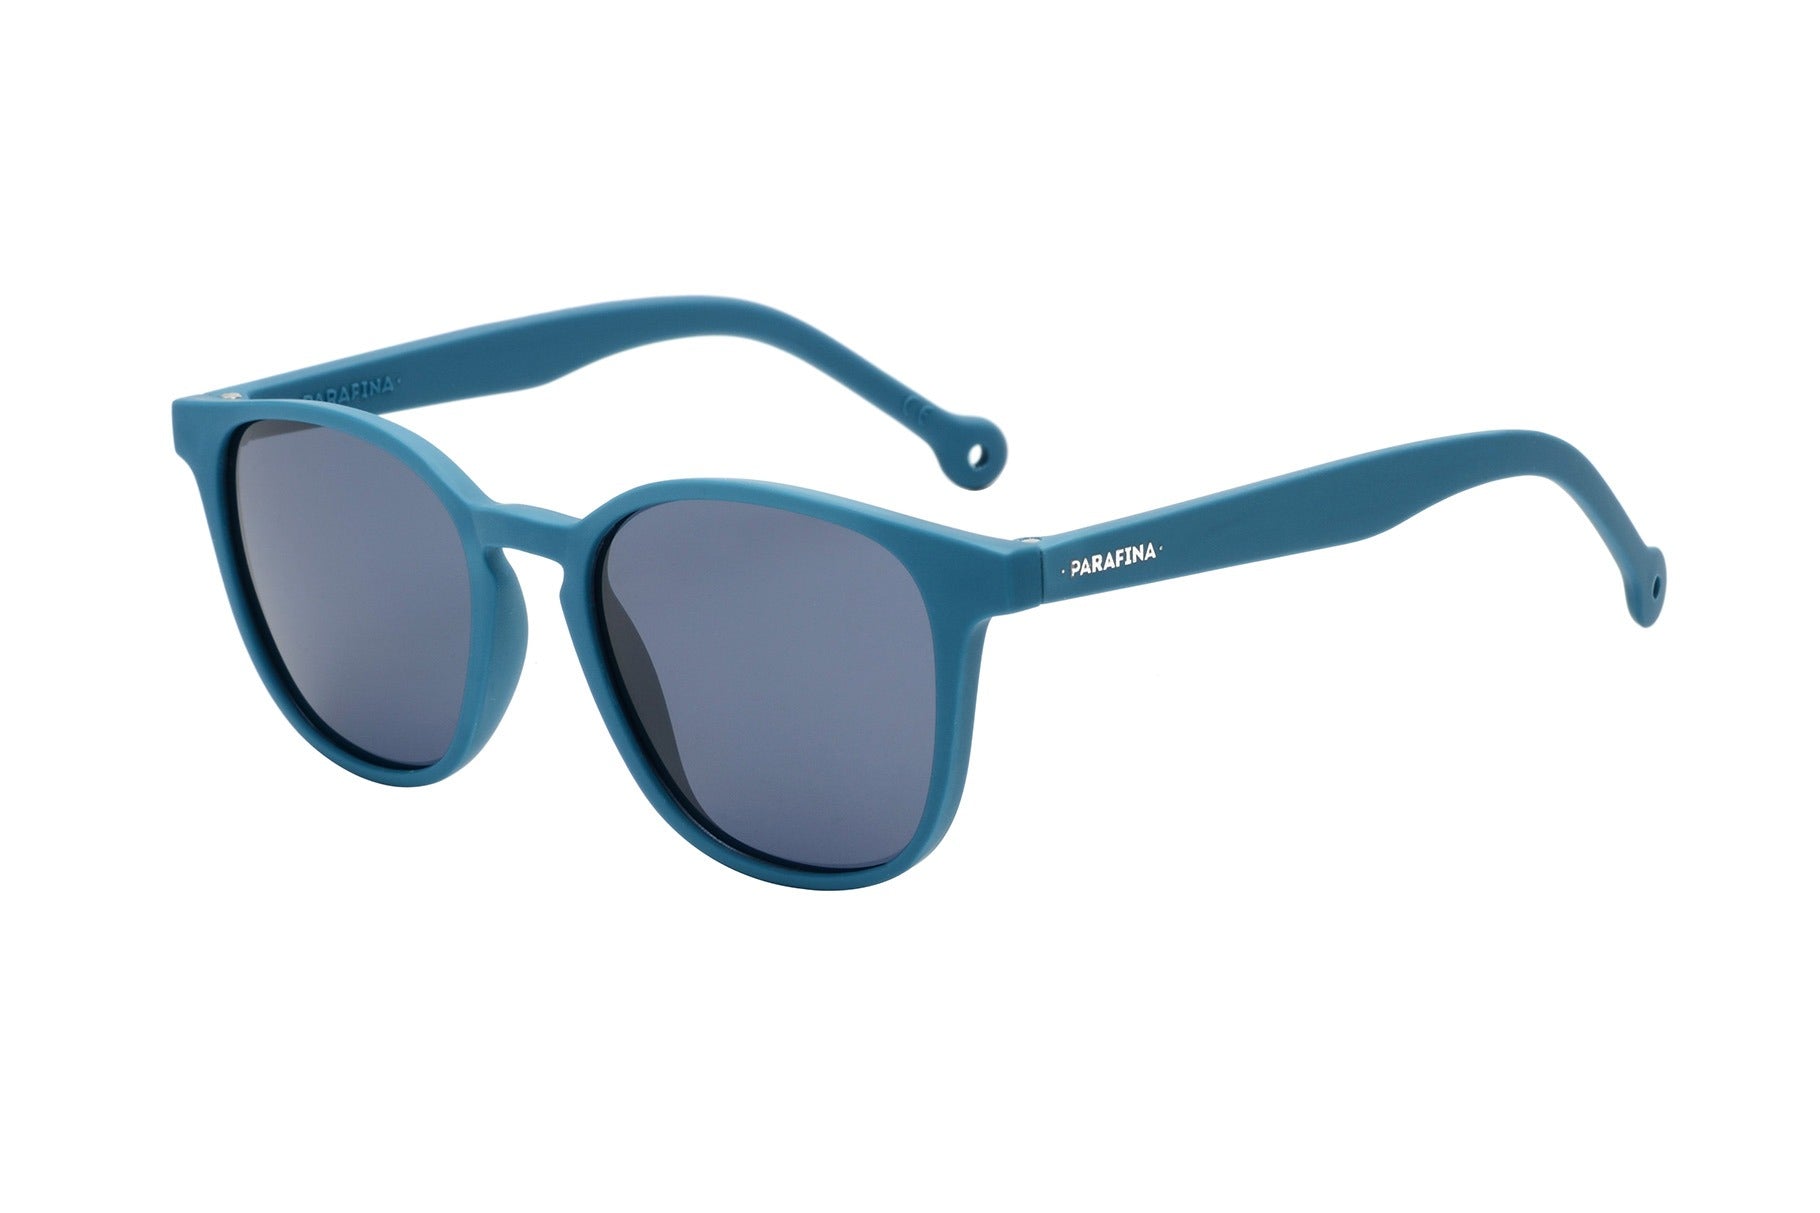 Parafina Sunglasses - RUTA Recycled Rubber